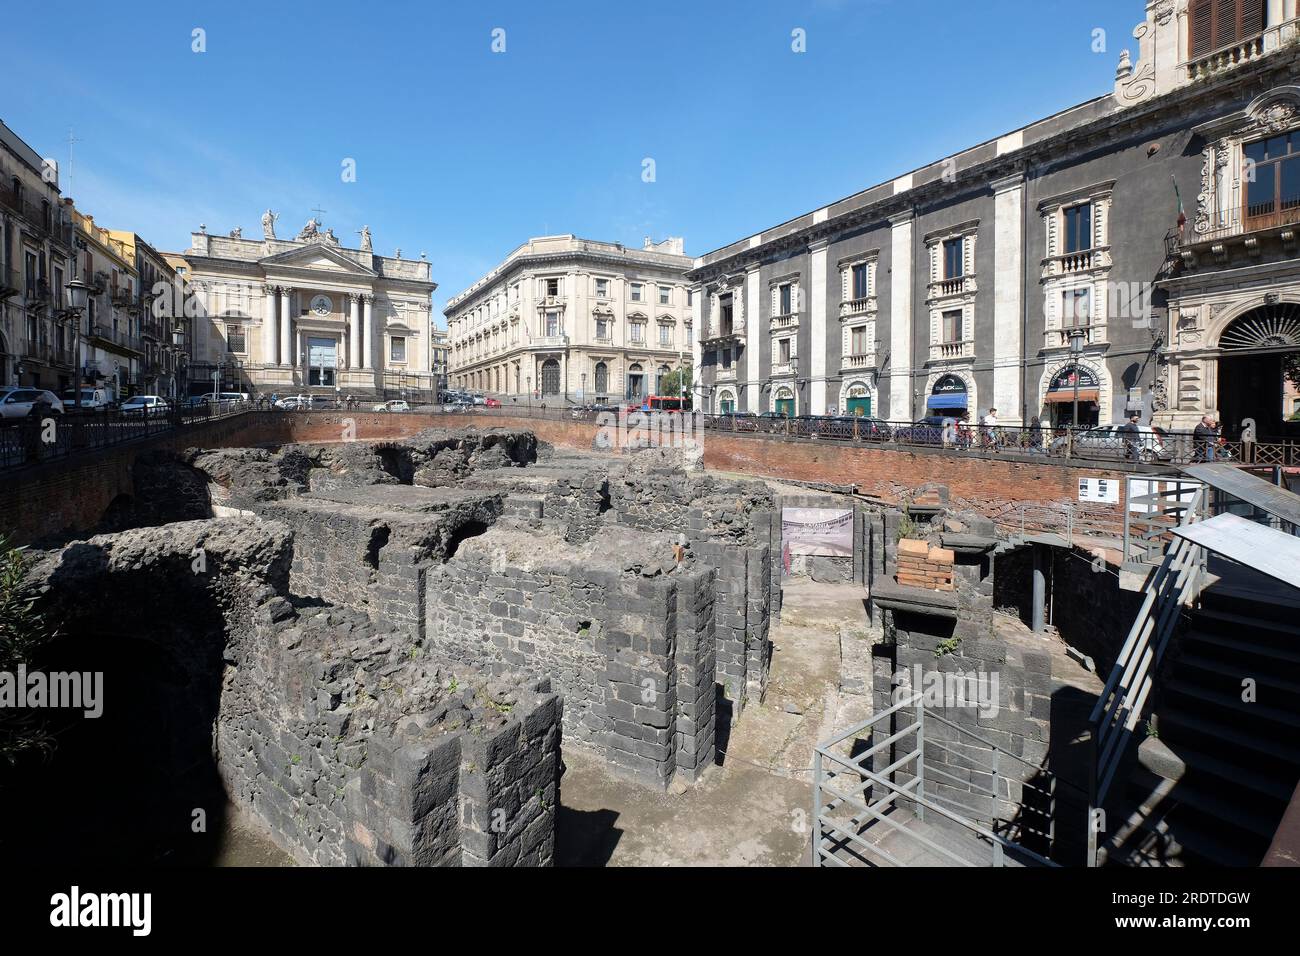 Remains of the Roman amphitheatre at the Piazza Stesicoro. The ancient port city of Sicily. Catania, Italy Stock Photo